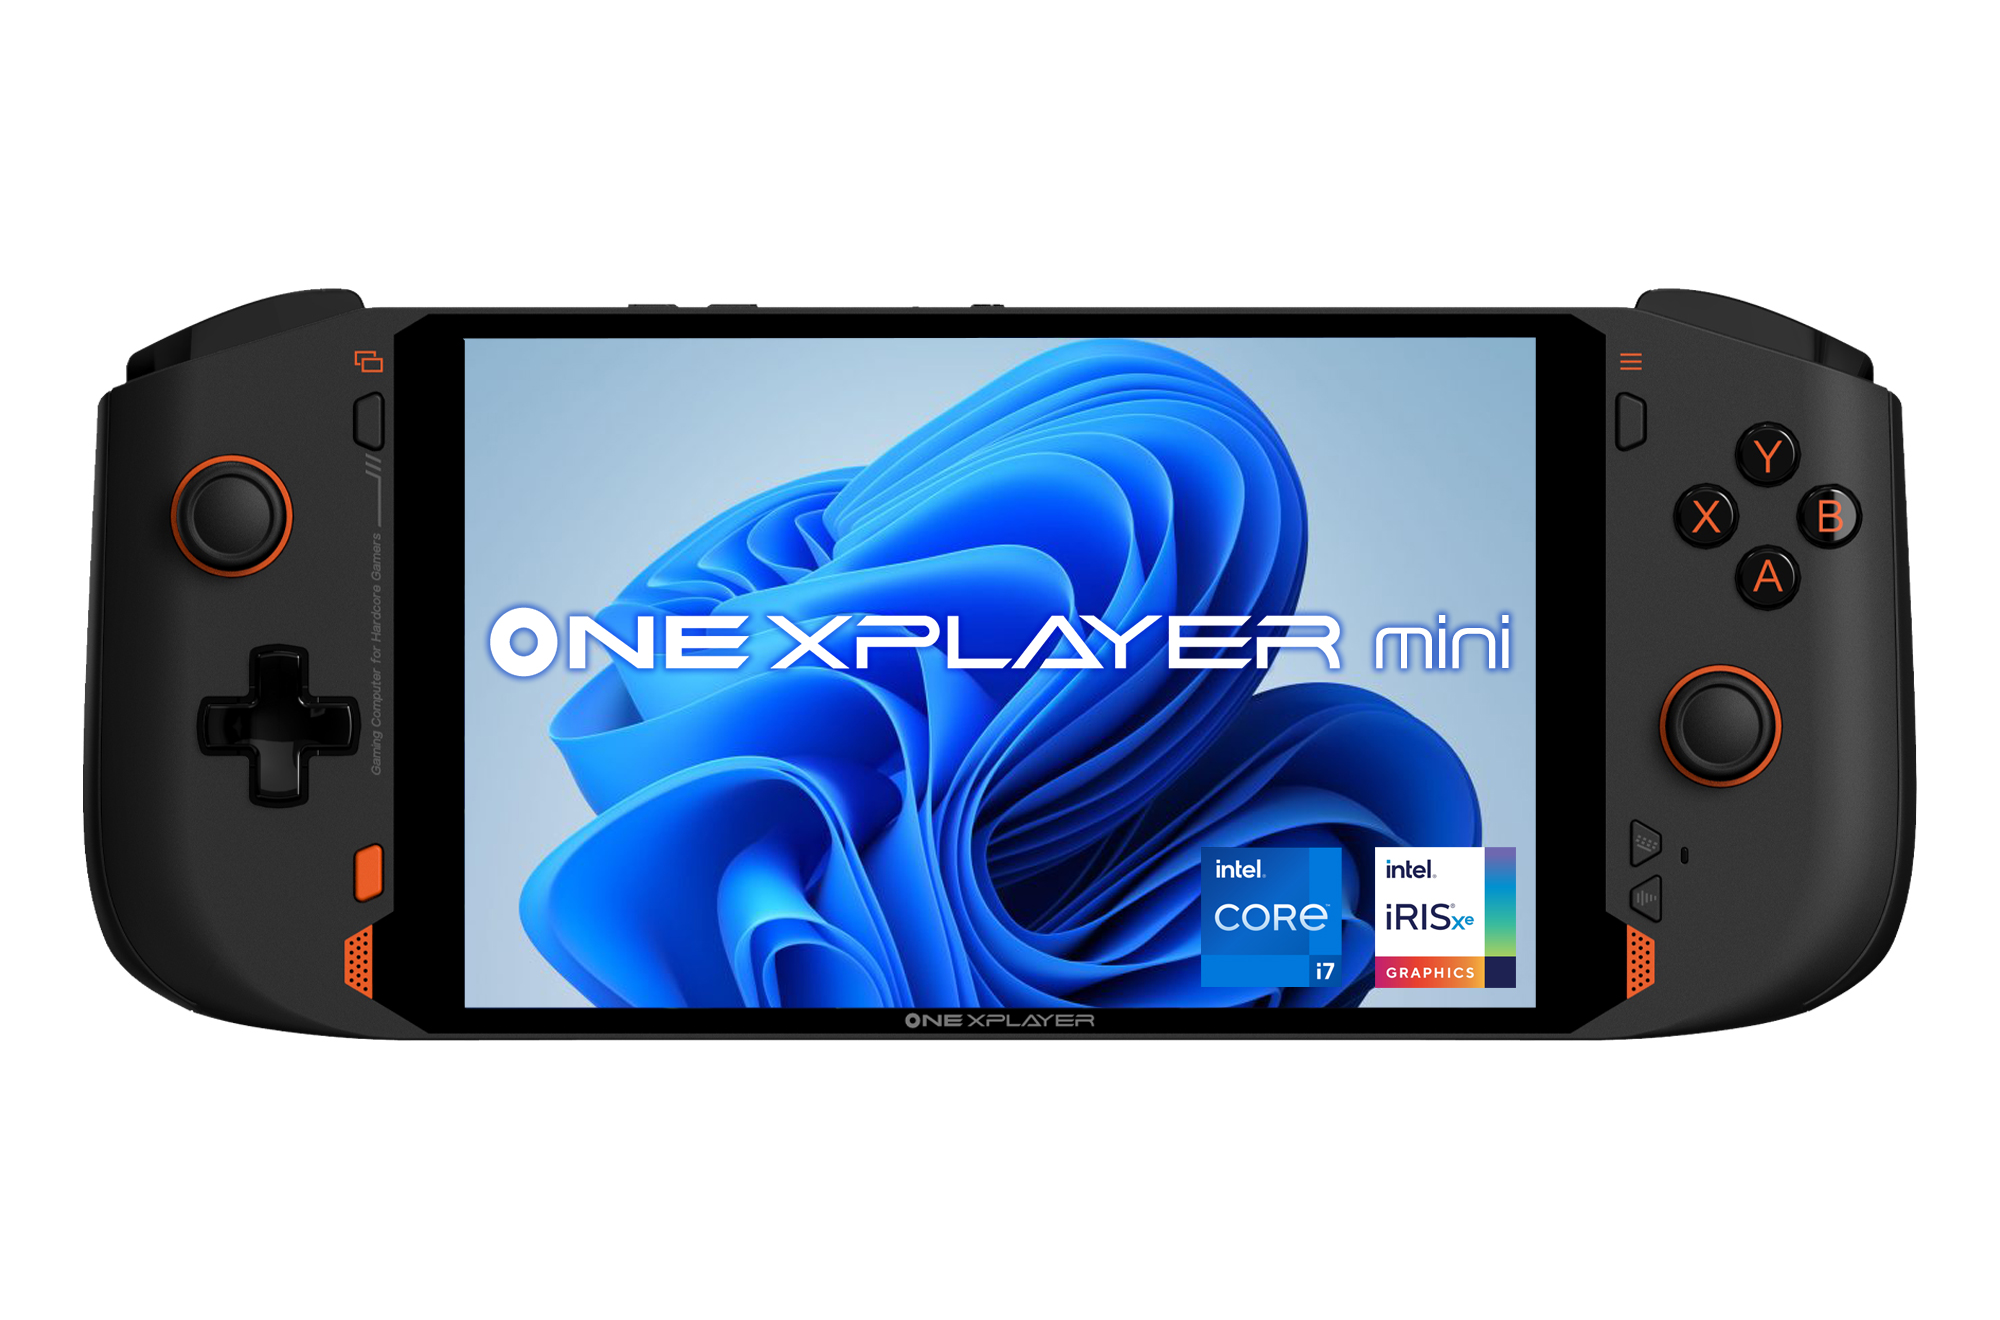 ONEXPLAYER mini launches with a 7-inch and 1200p display plus an Intel Core i7-1195G7 processor and up to 2 TB of storage - NotebookCheck.net News